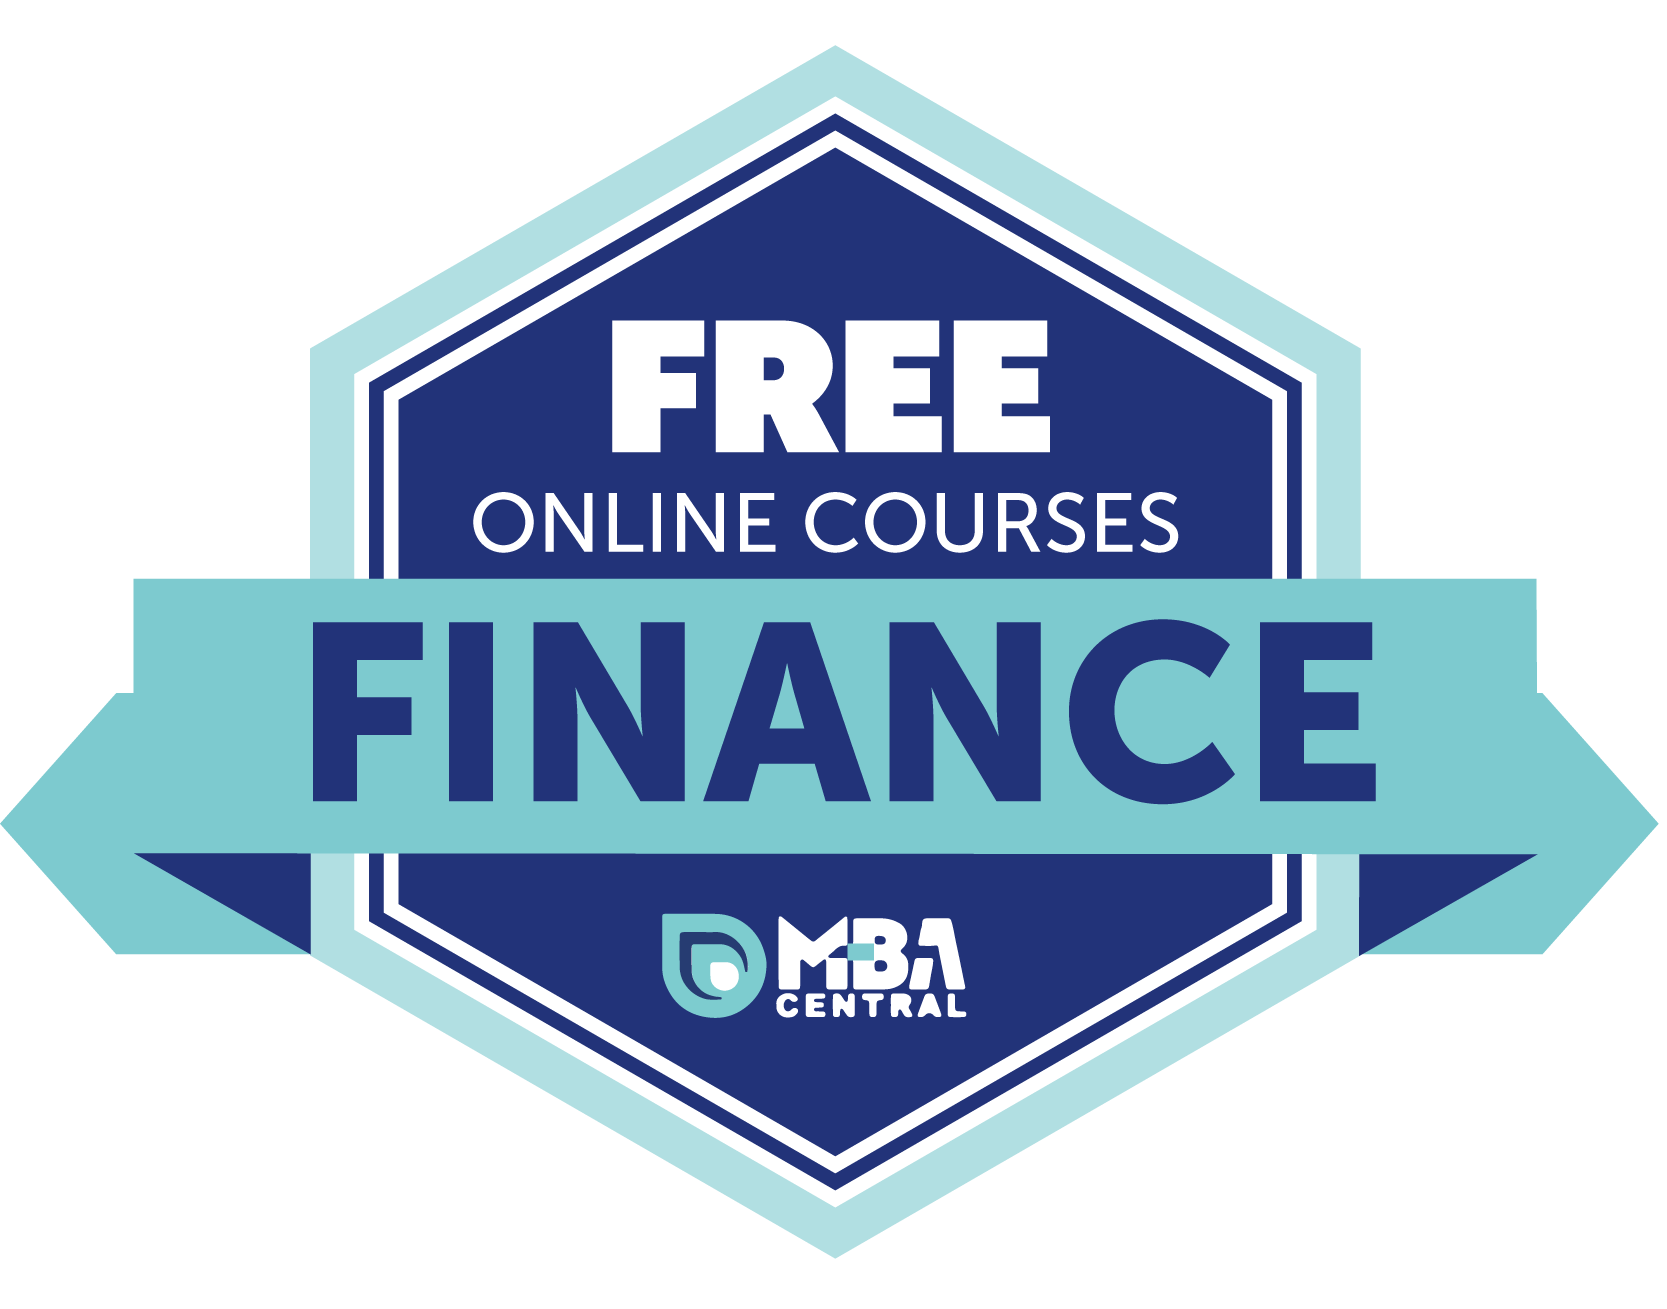 FREE Online Courses with FREE Certificates 